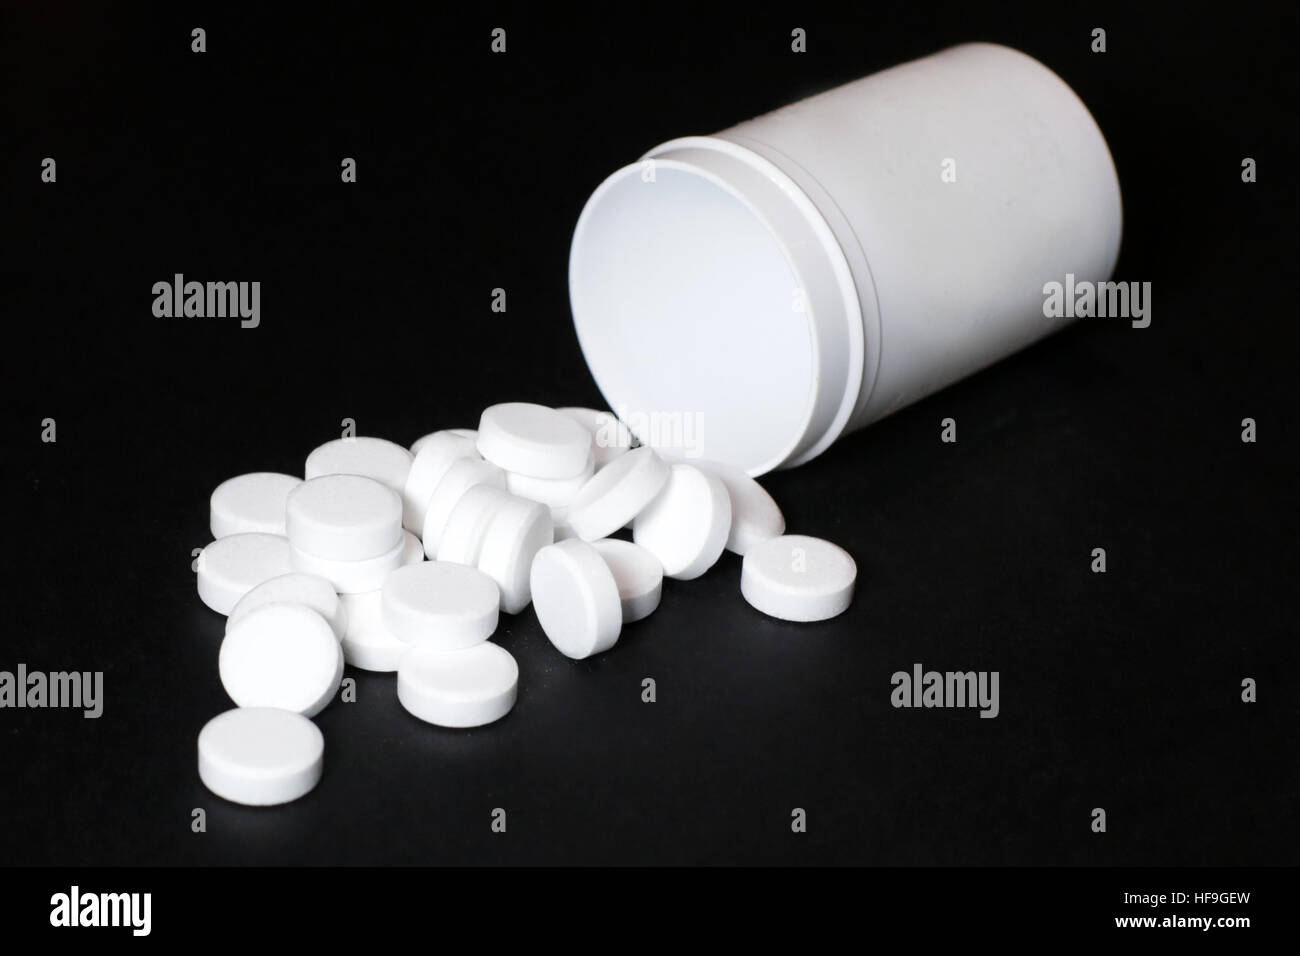 White pills, medicines painkiller. Medications on a black background. Stock Photo